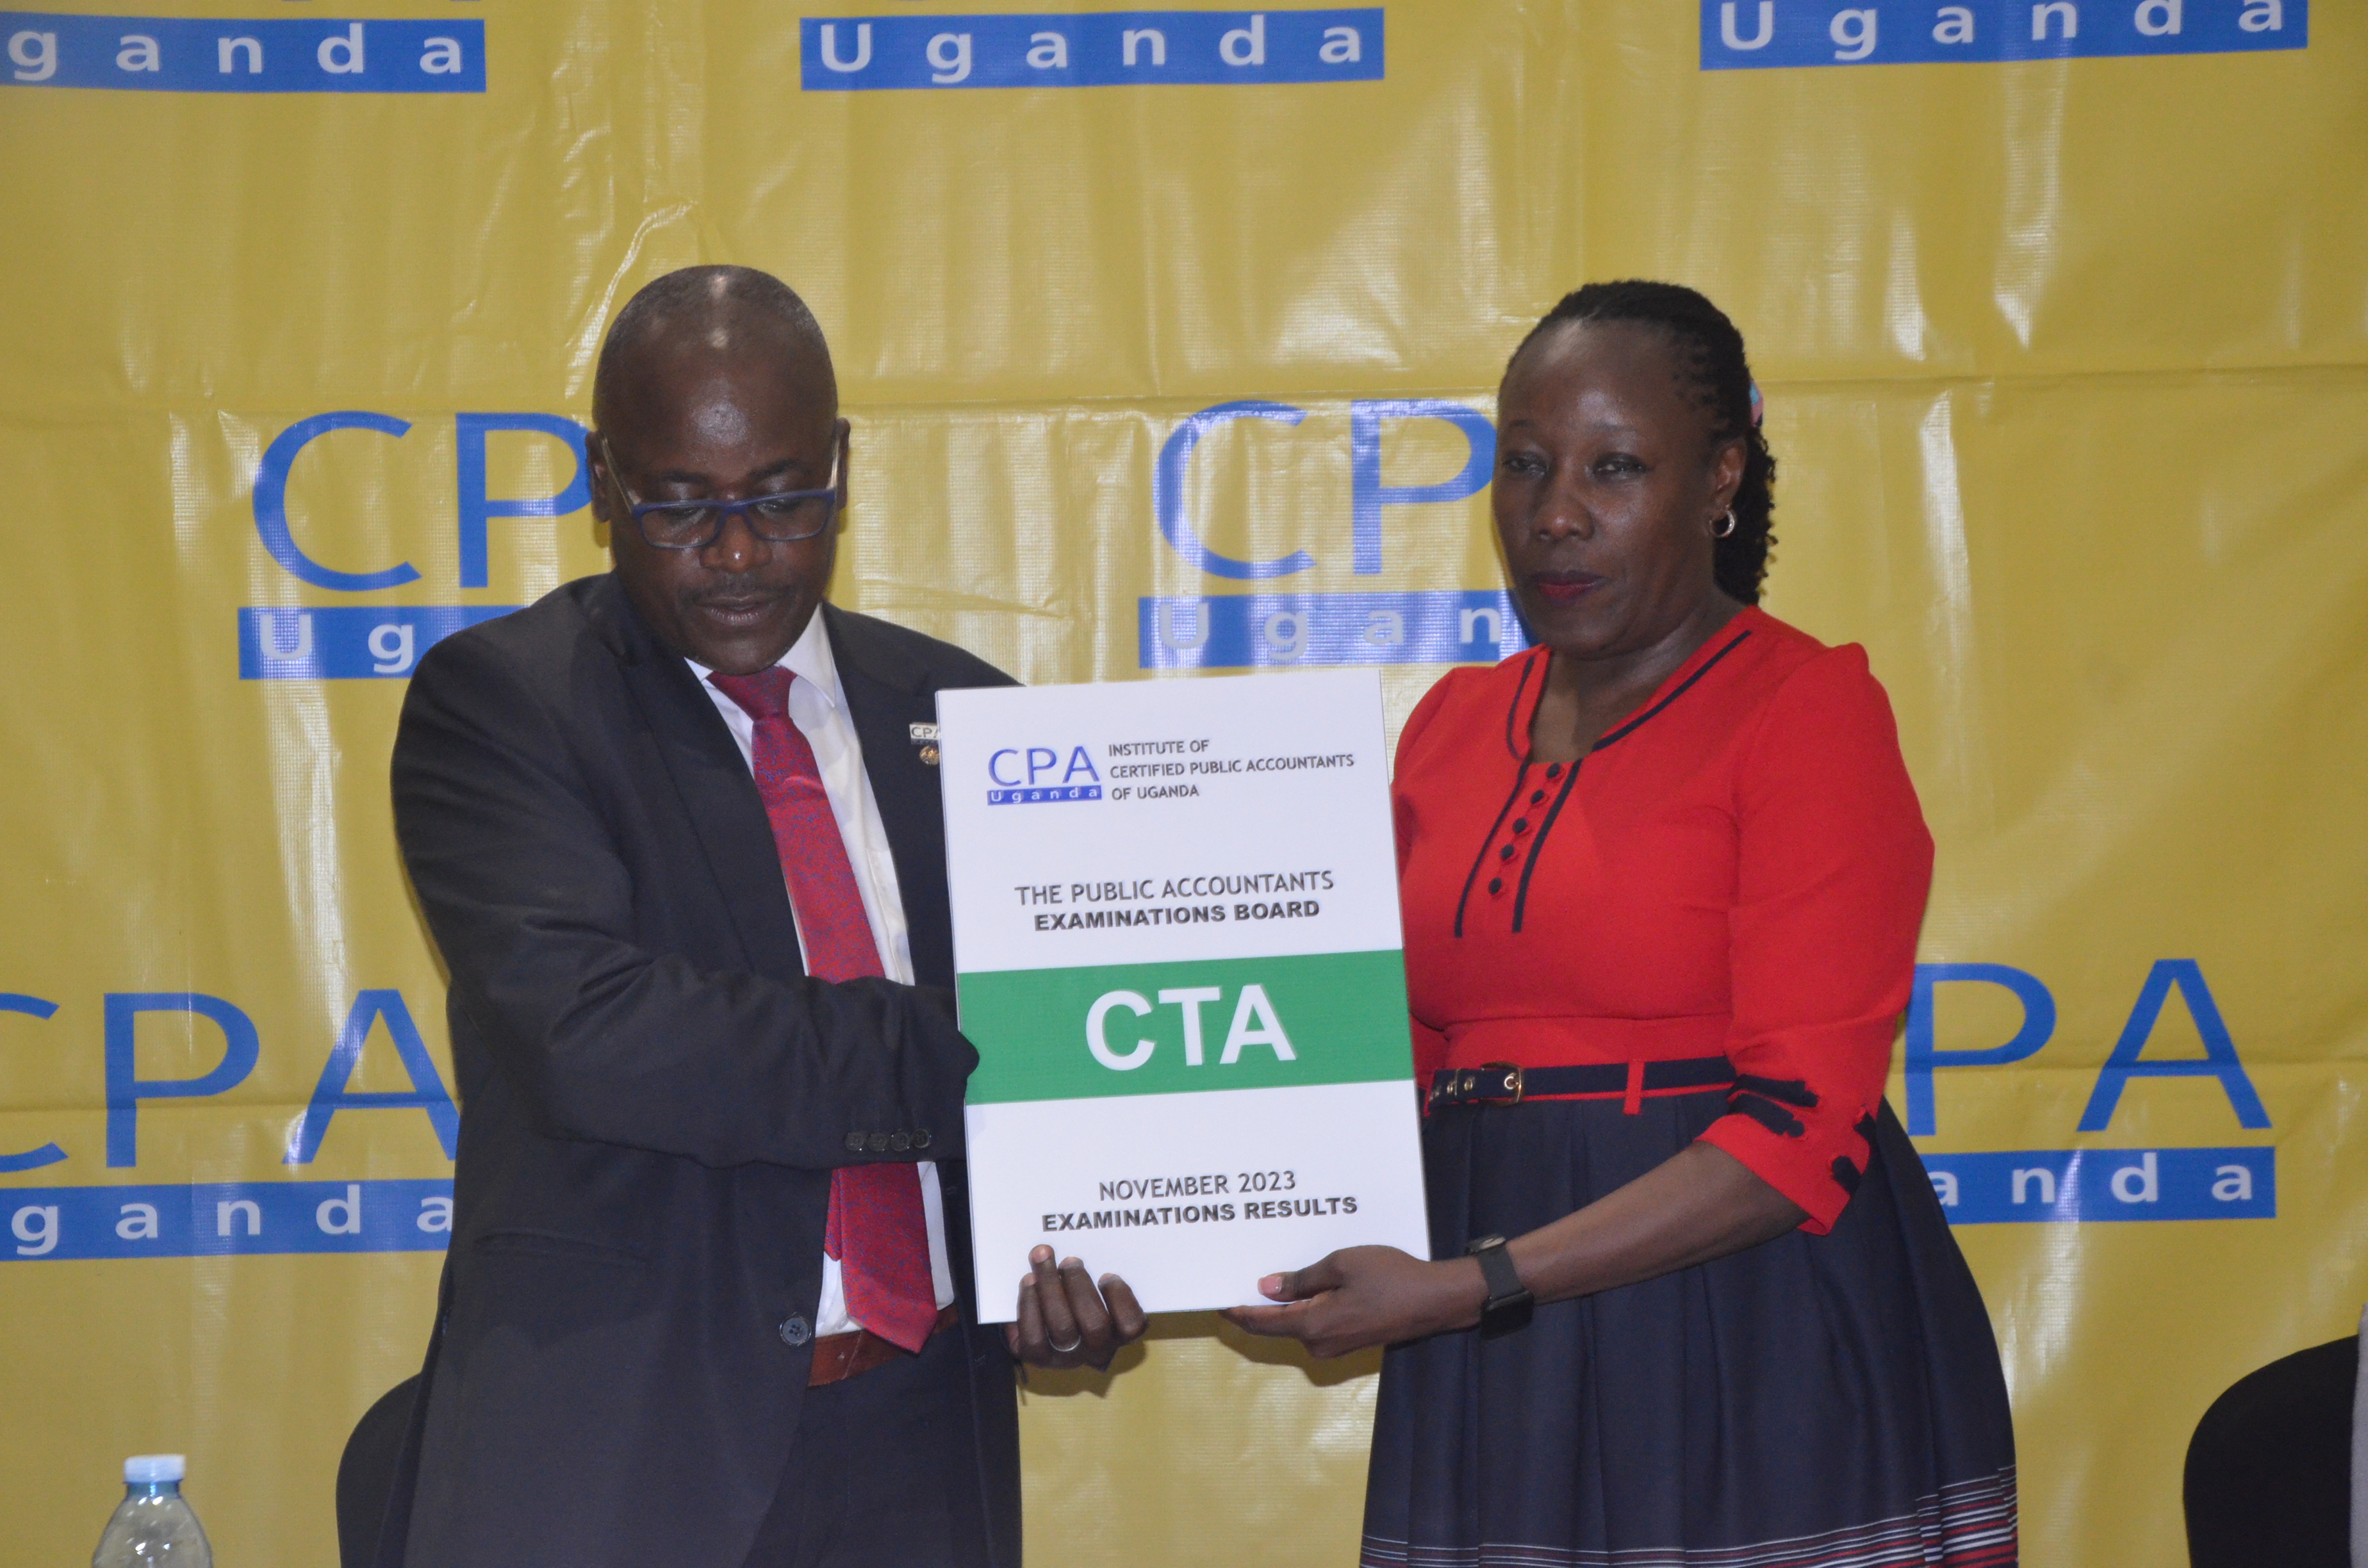 CPA Pro Laura Orobia, Chairperson PAEB  hands over the CTA November Examinations 2023 results to Ronald Mutumba, Vice President of ICPAU.